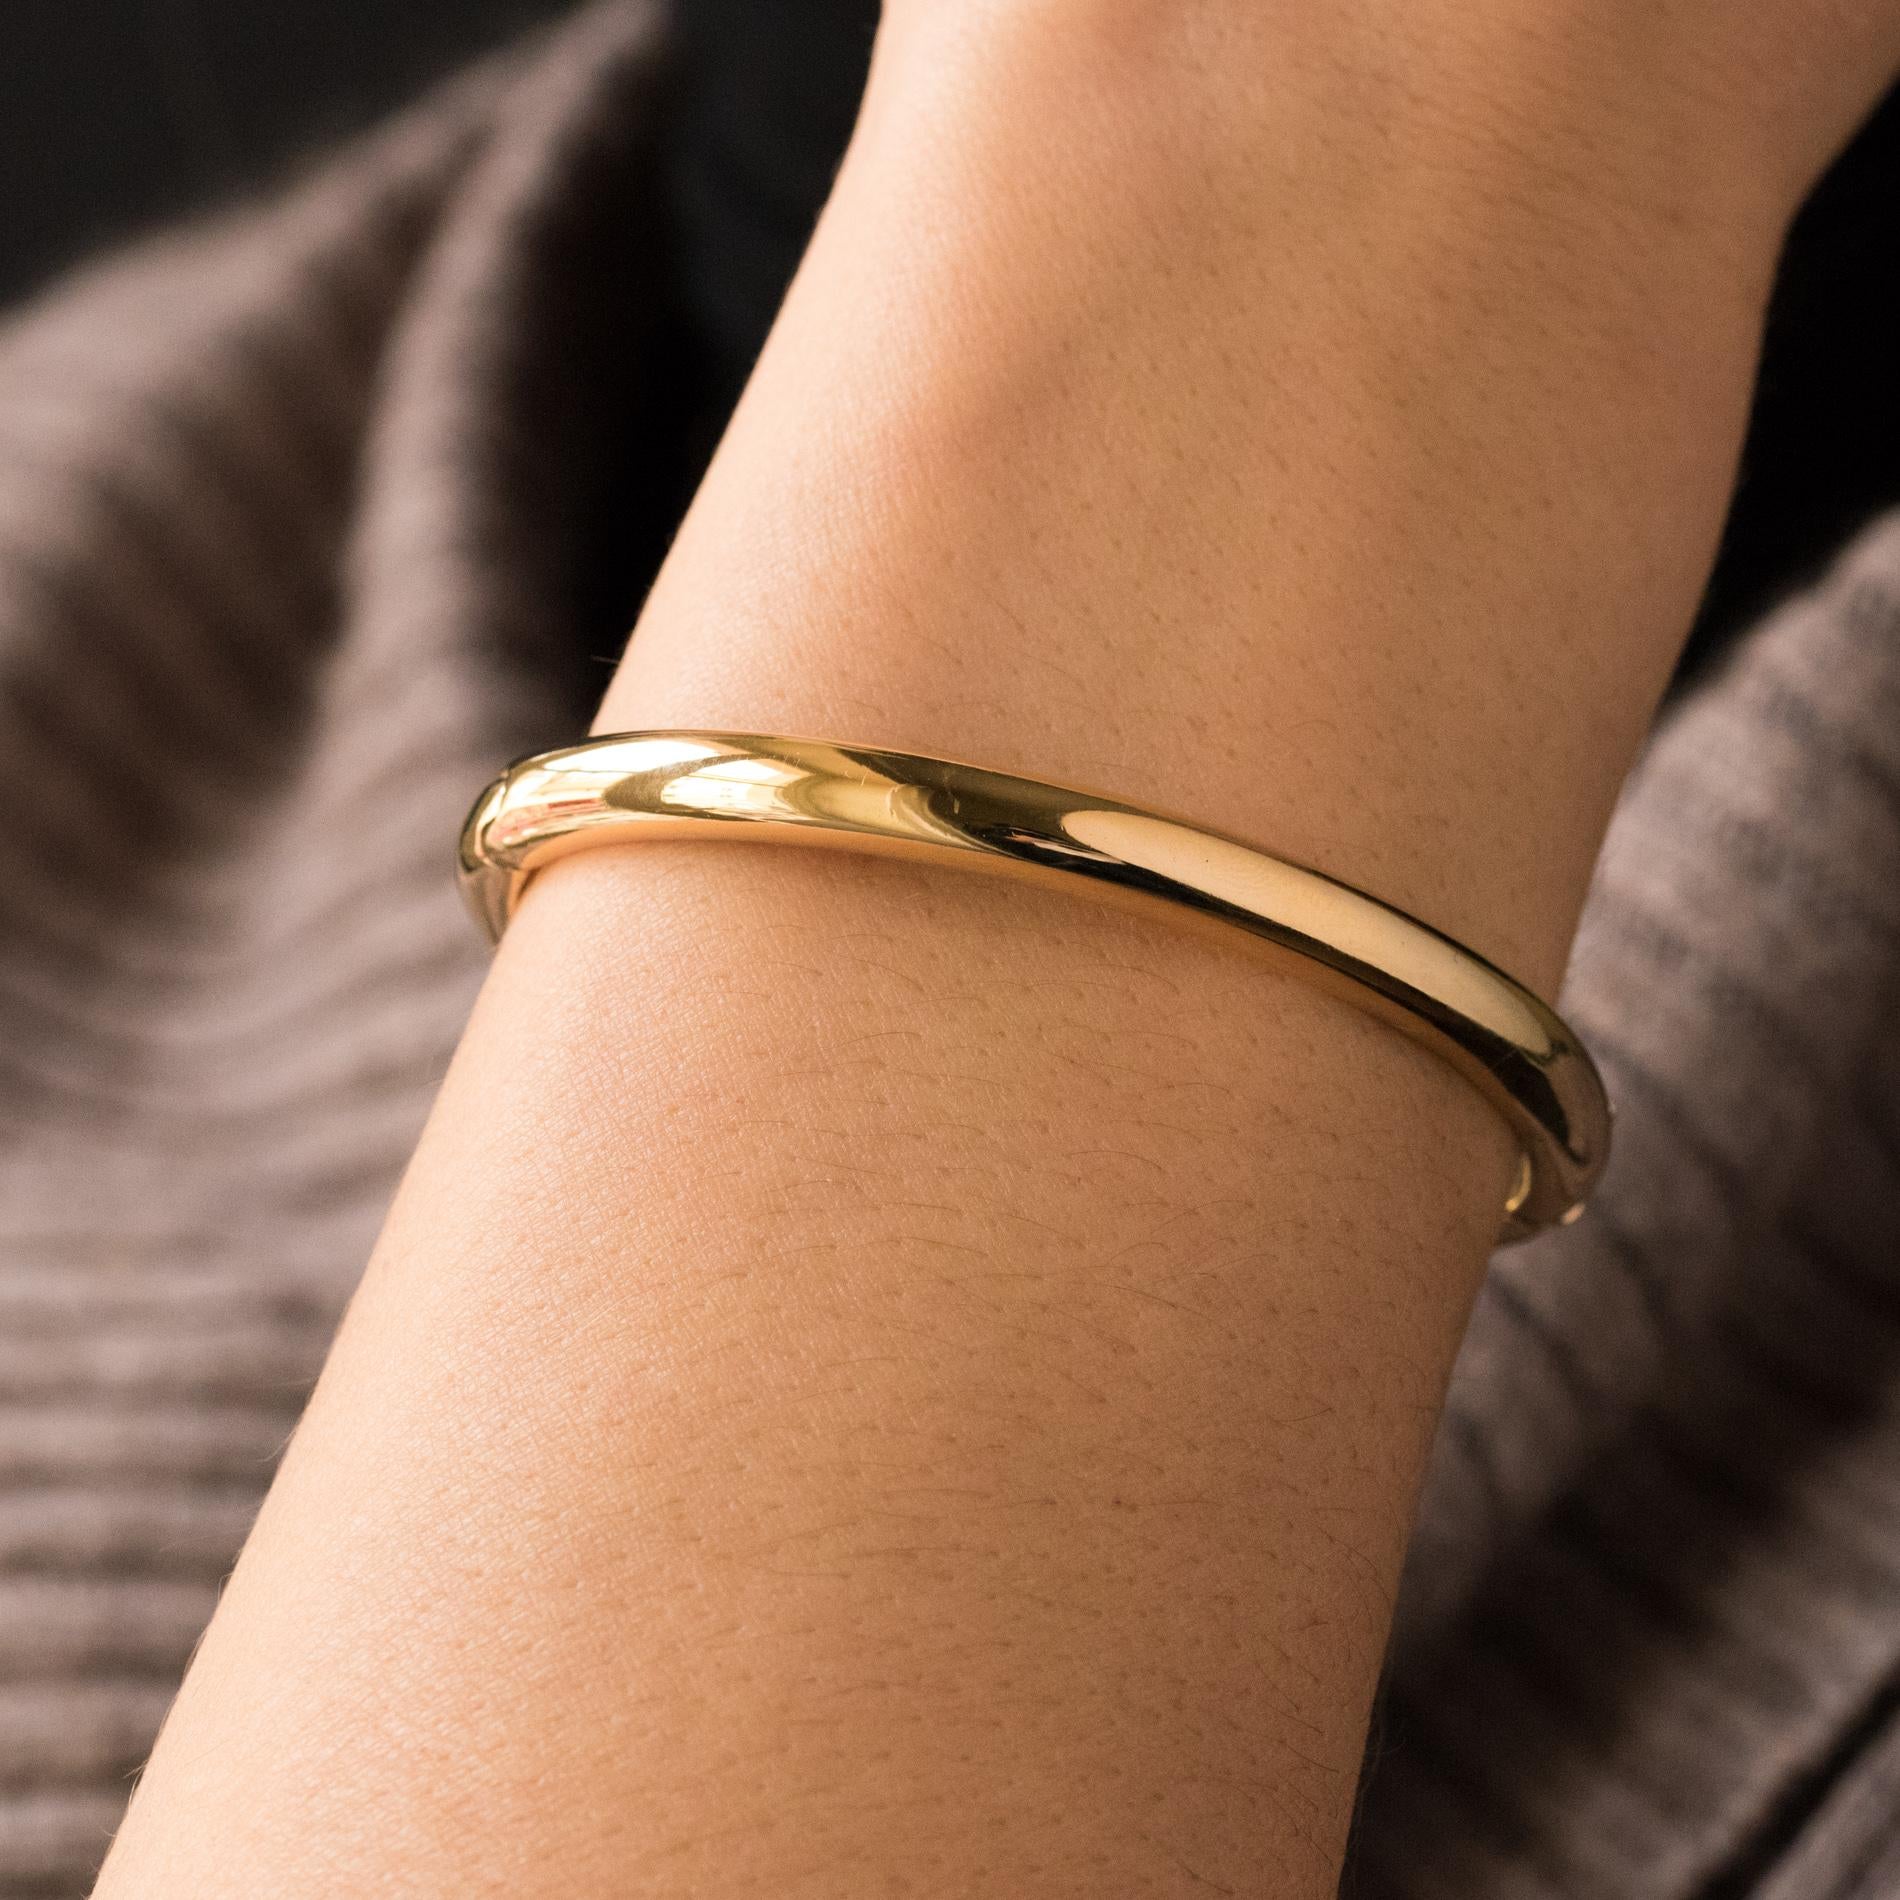 Bracelet in 18 karat yellow gold.
Oval-shaped half-bangle bracelet, it can be opened on one side using a hinge. The clasp is ratchet with a safety 8.
Wirst circumference : 16 cm, largest inside diameter: 6.9 cm, width: 5.6 mm, thickness: 4.3